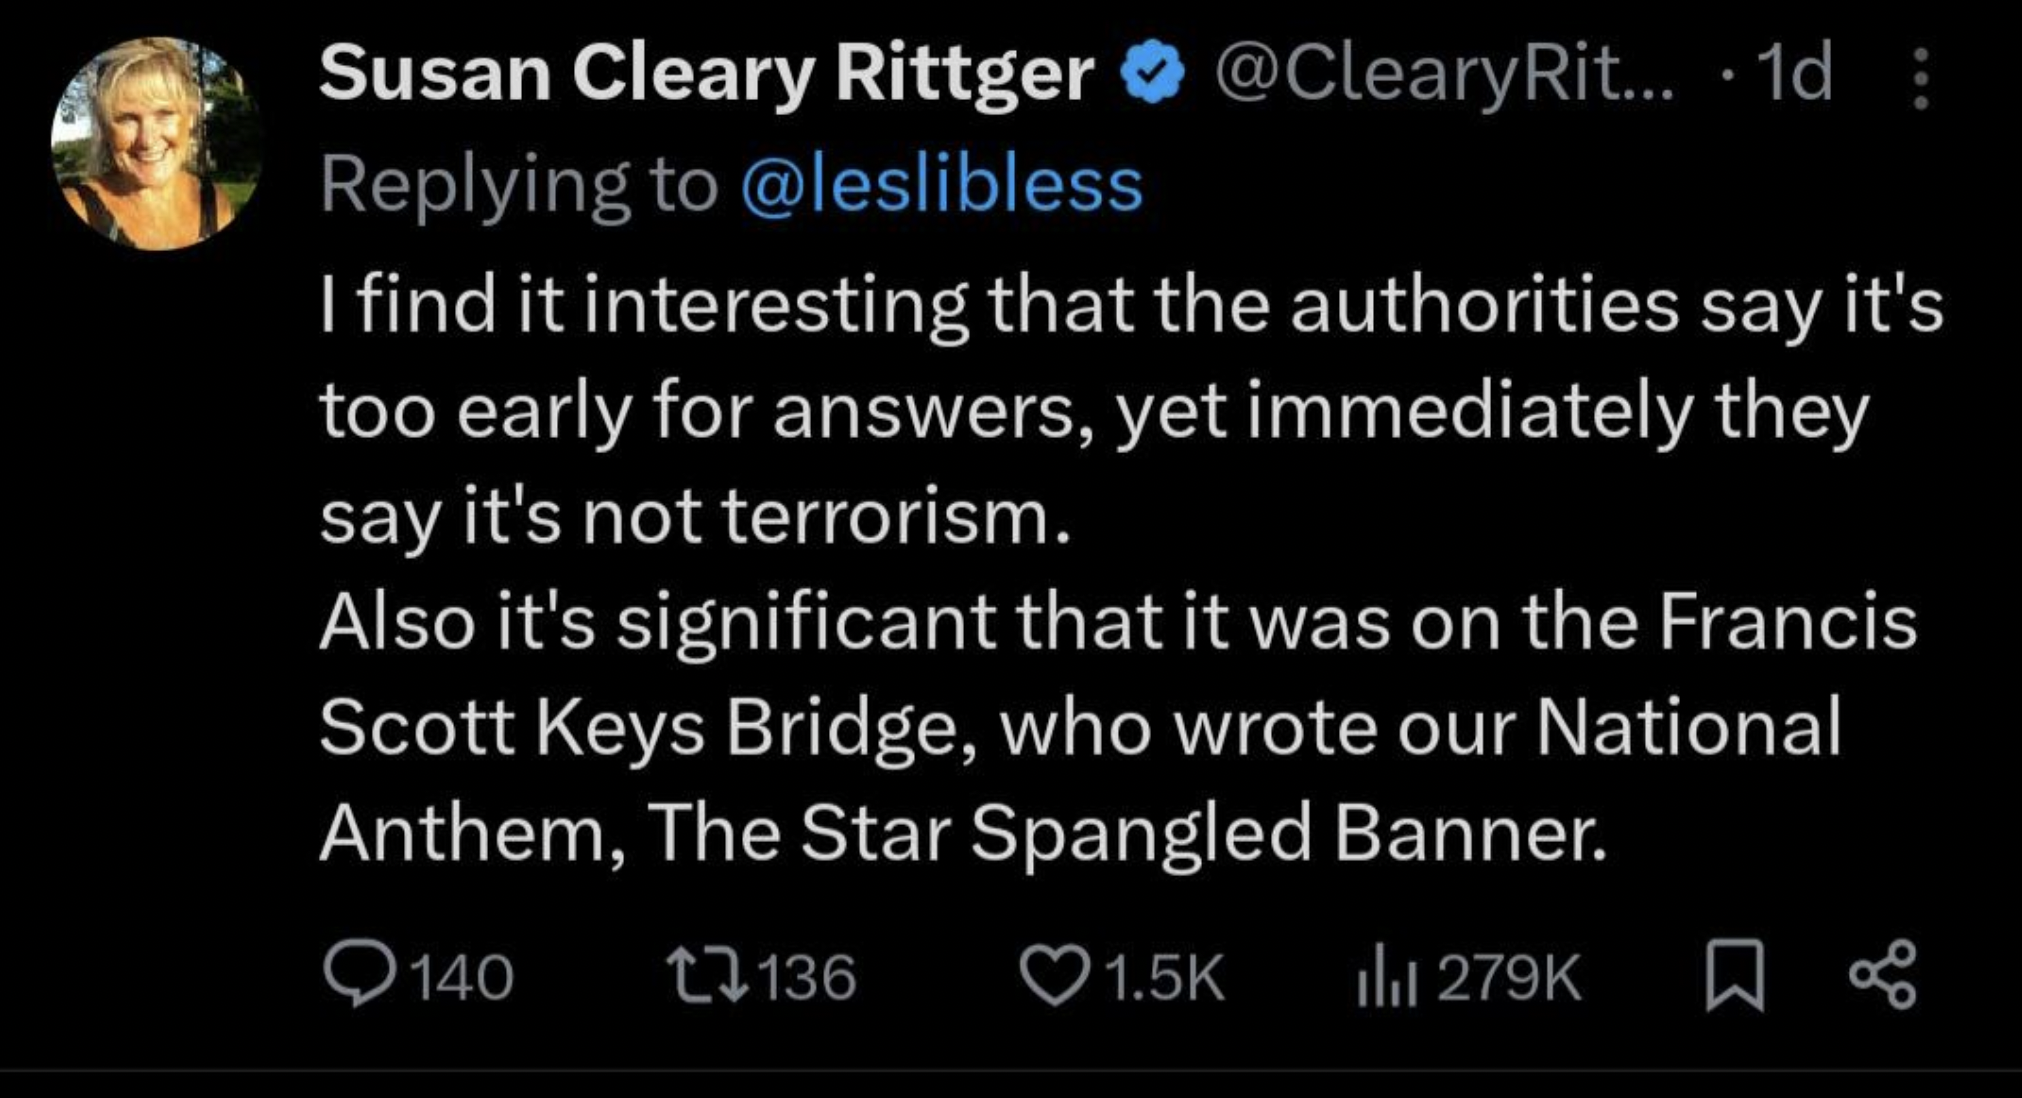 atmosphere - Susan Cleary Rittger Rit... 1d I find it interesting that the authorities say it's too early for answers, yet immediately they say it's not terrorism. Also it's significant that it was on the Francis Scott Keys Bridge, who wrote our National 